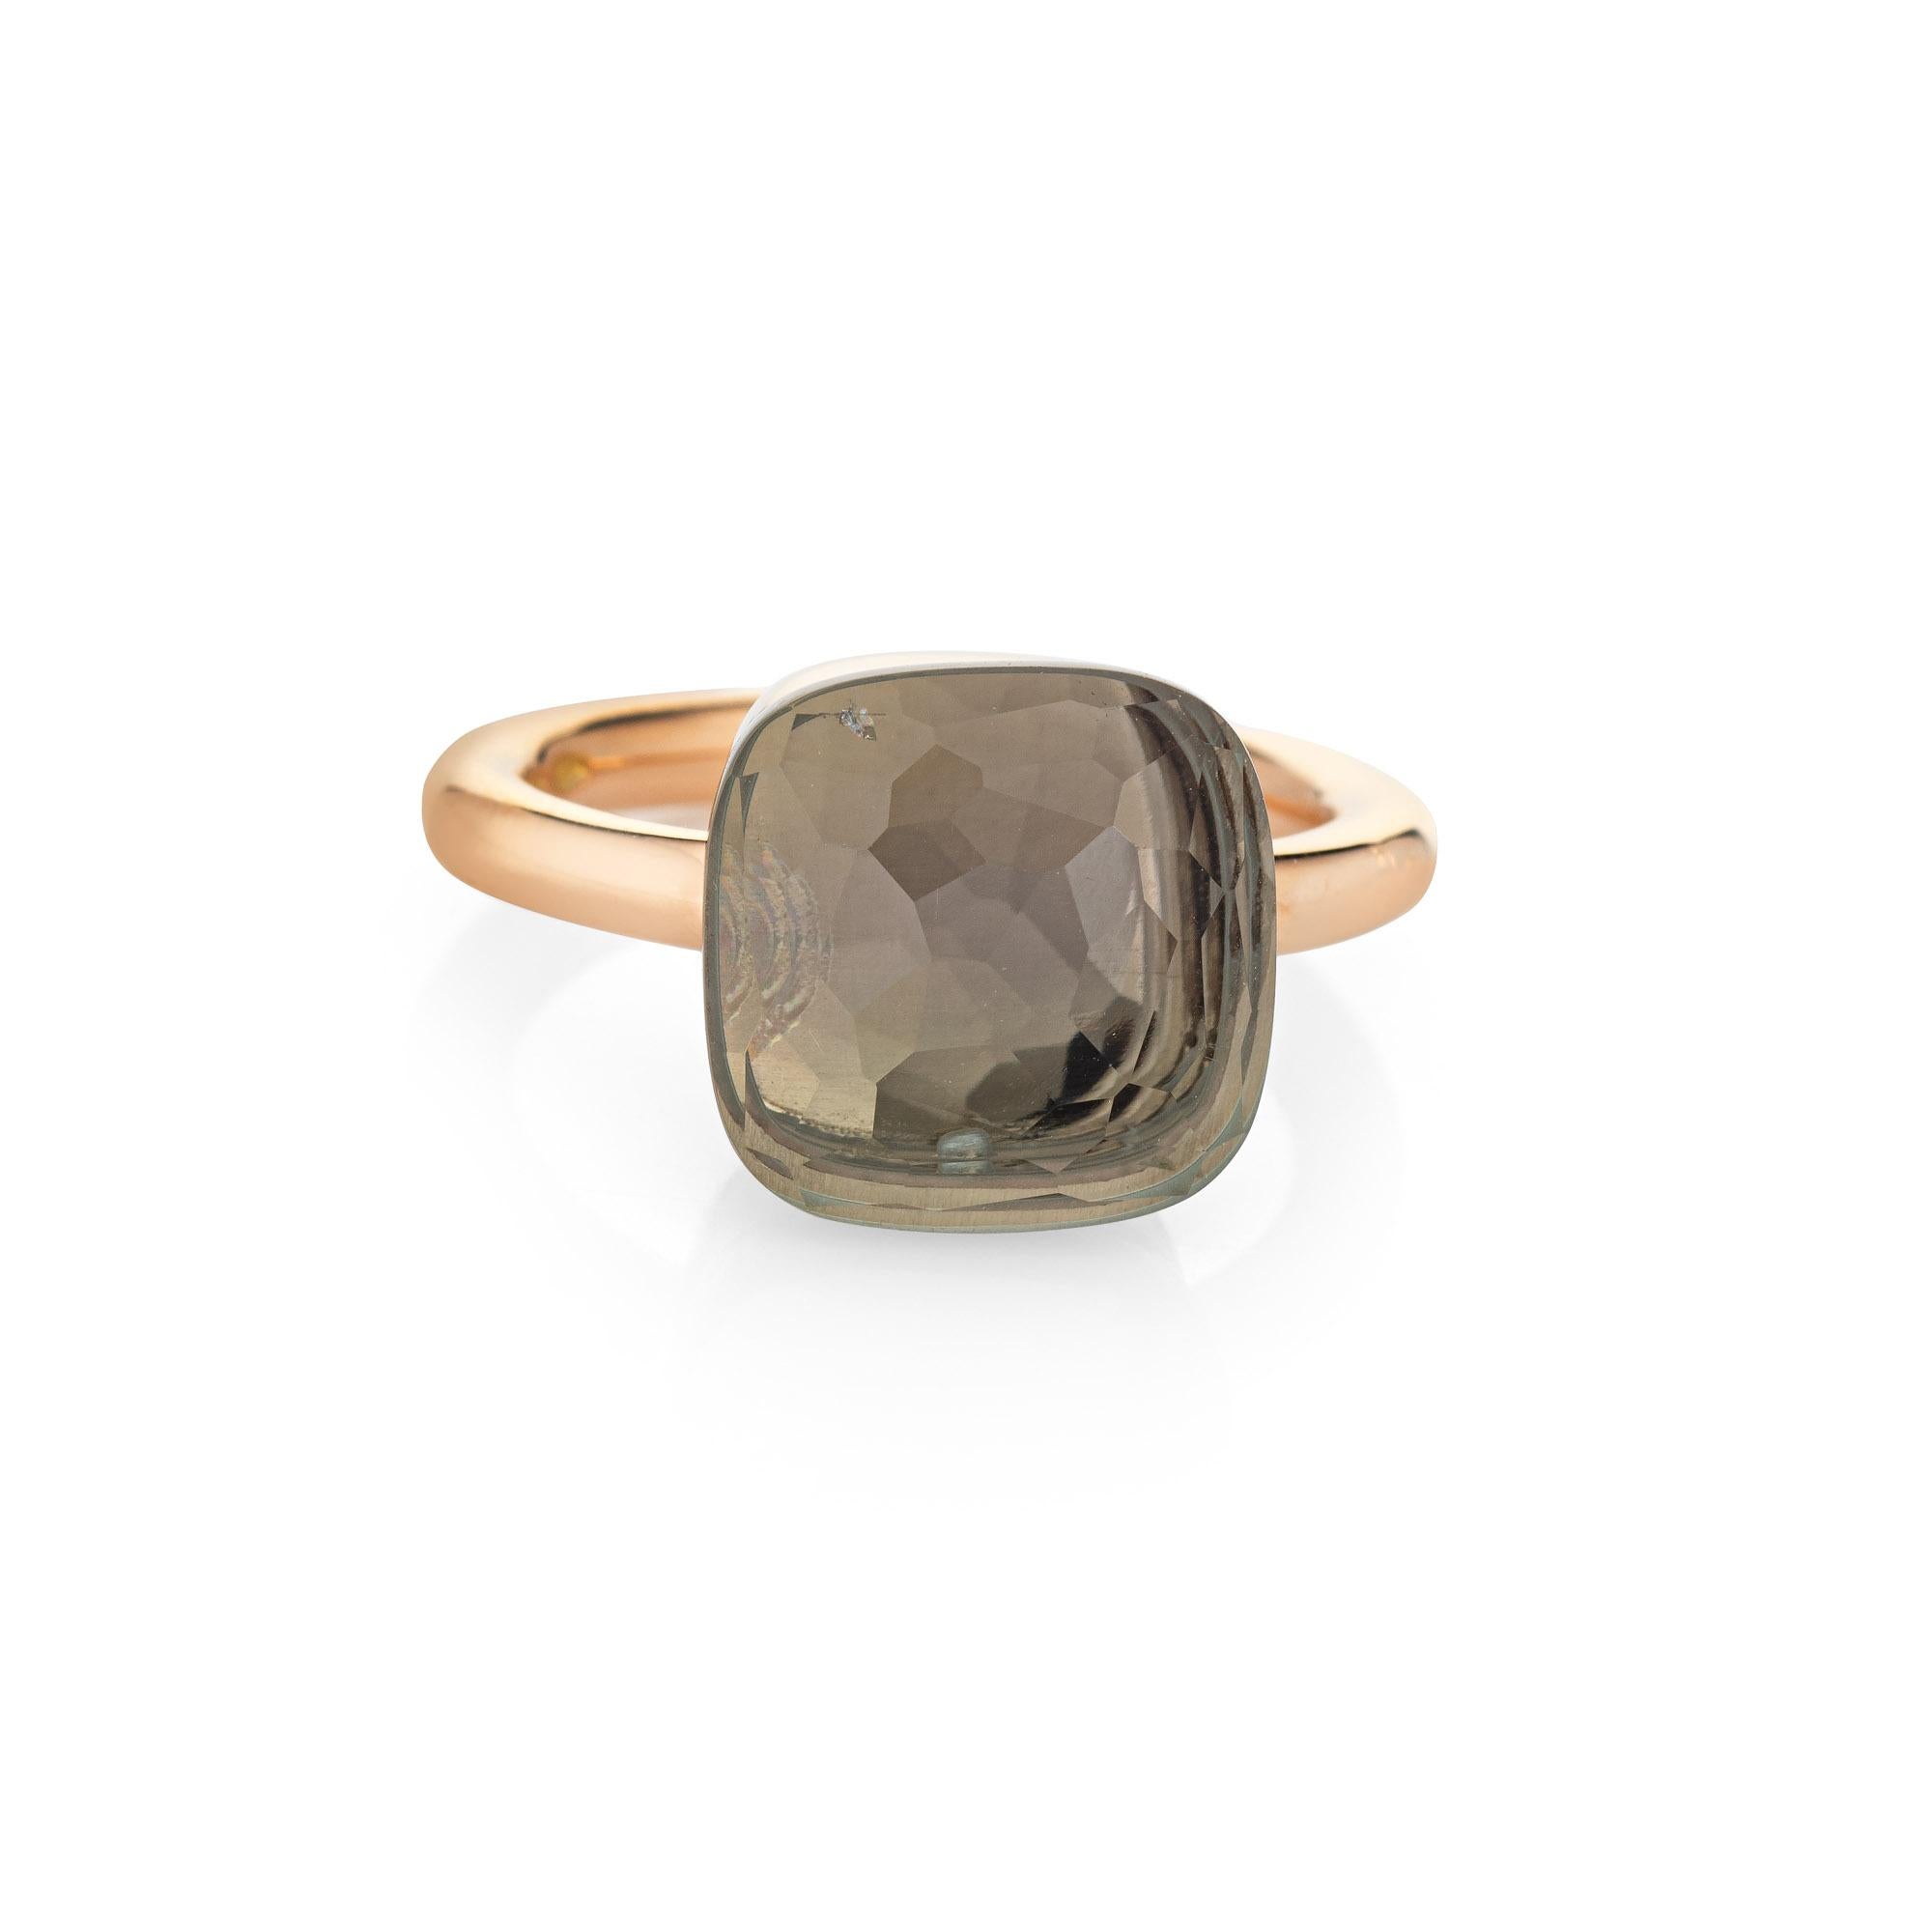 Finely detailed estate Pomellato Nudo Maxi prasiolite ring, crafted in 18 karat rose gold. 

Faceted prasiolite measures 12.5mm (estimated at 11 carats). The stone is in good condition with one small chip visible under a 10x loupe.   

The ring is